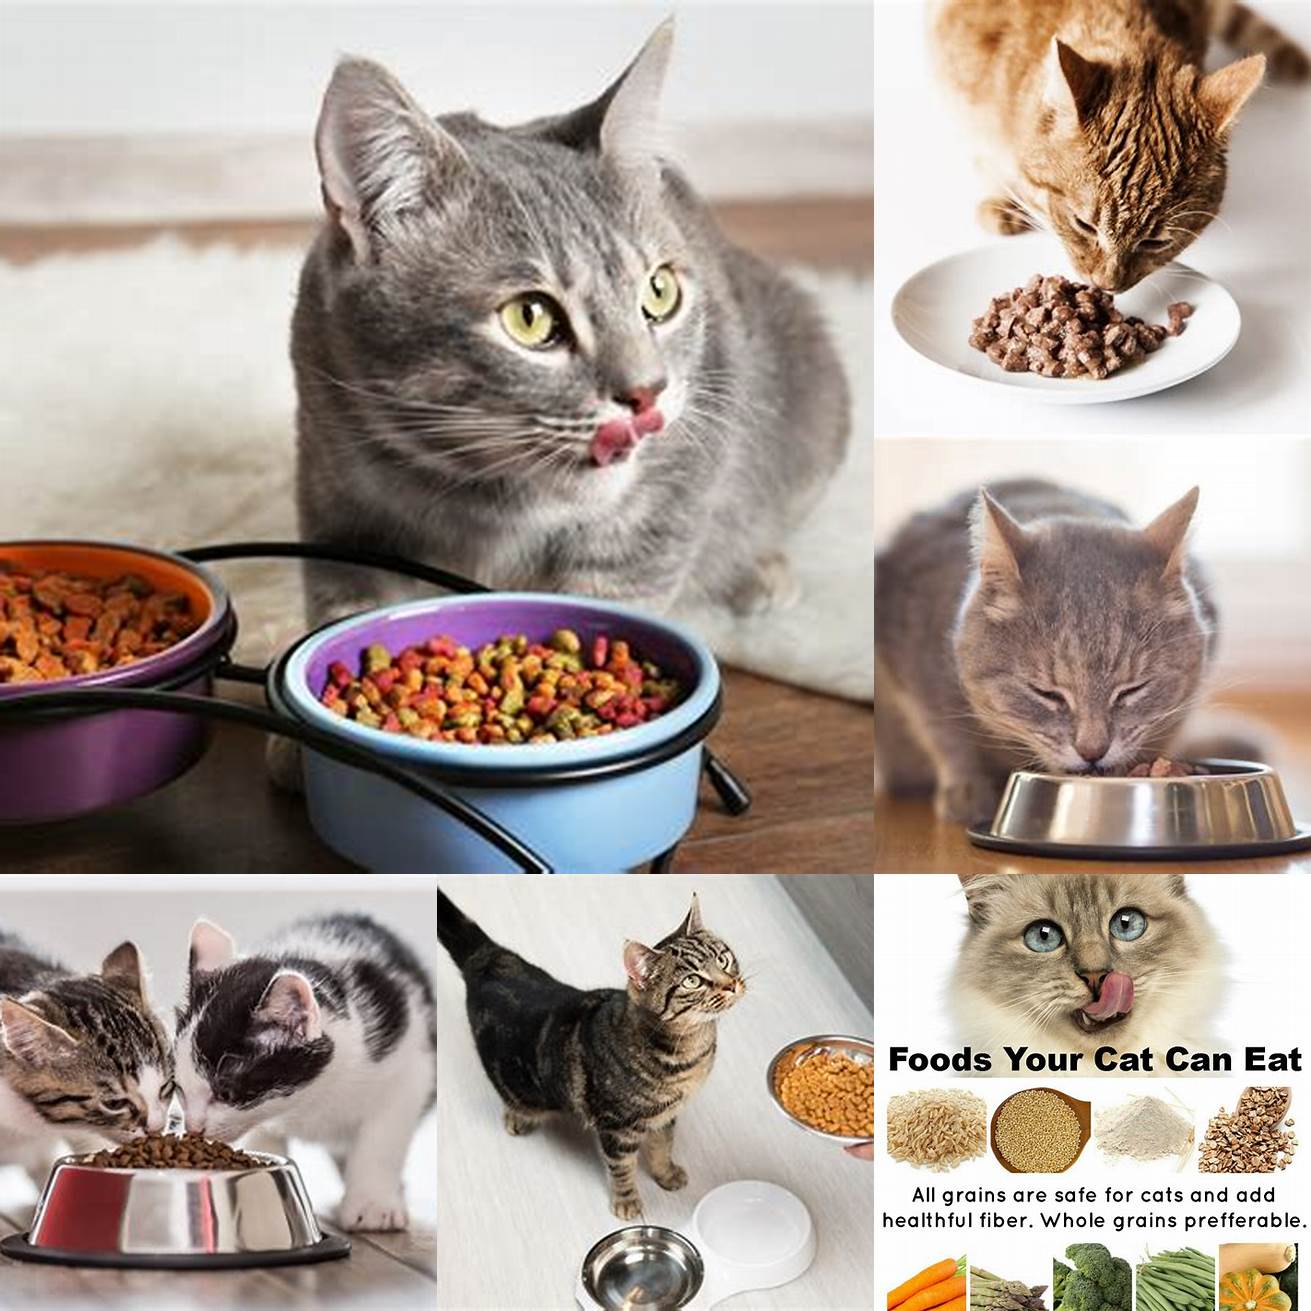 Feed your cat a diet that is high in fiber